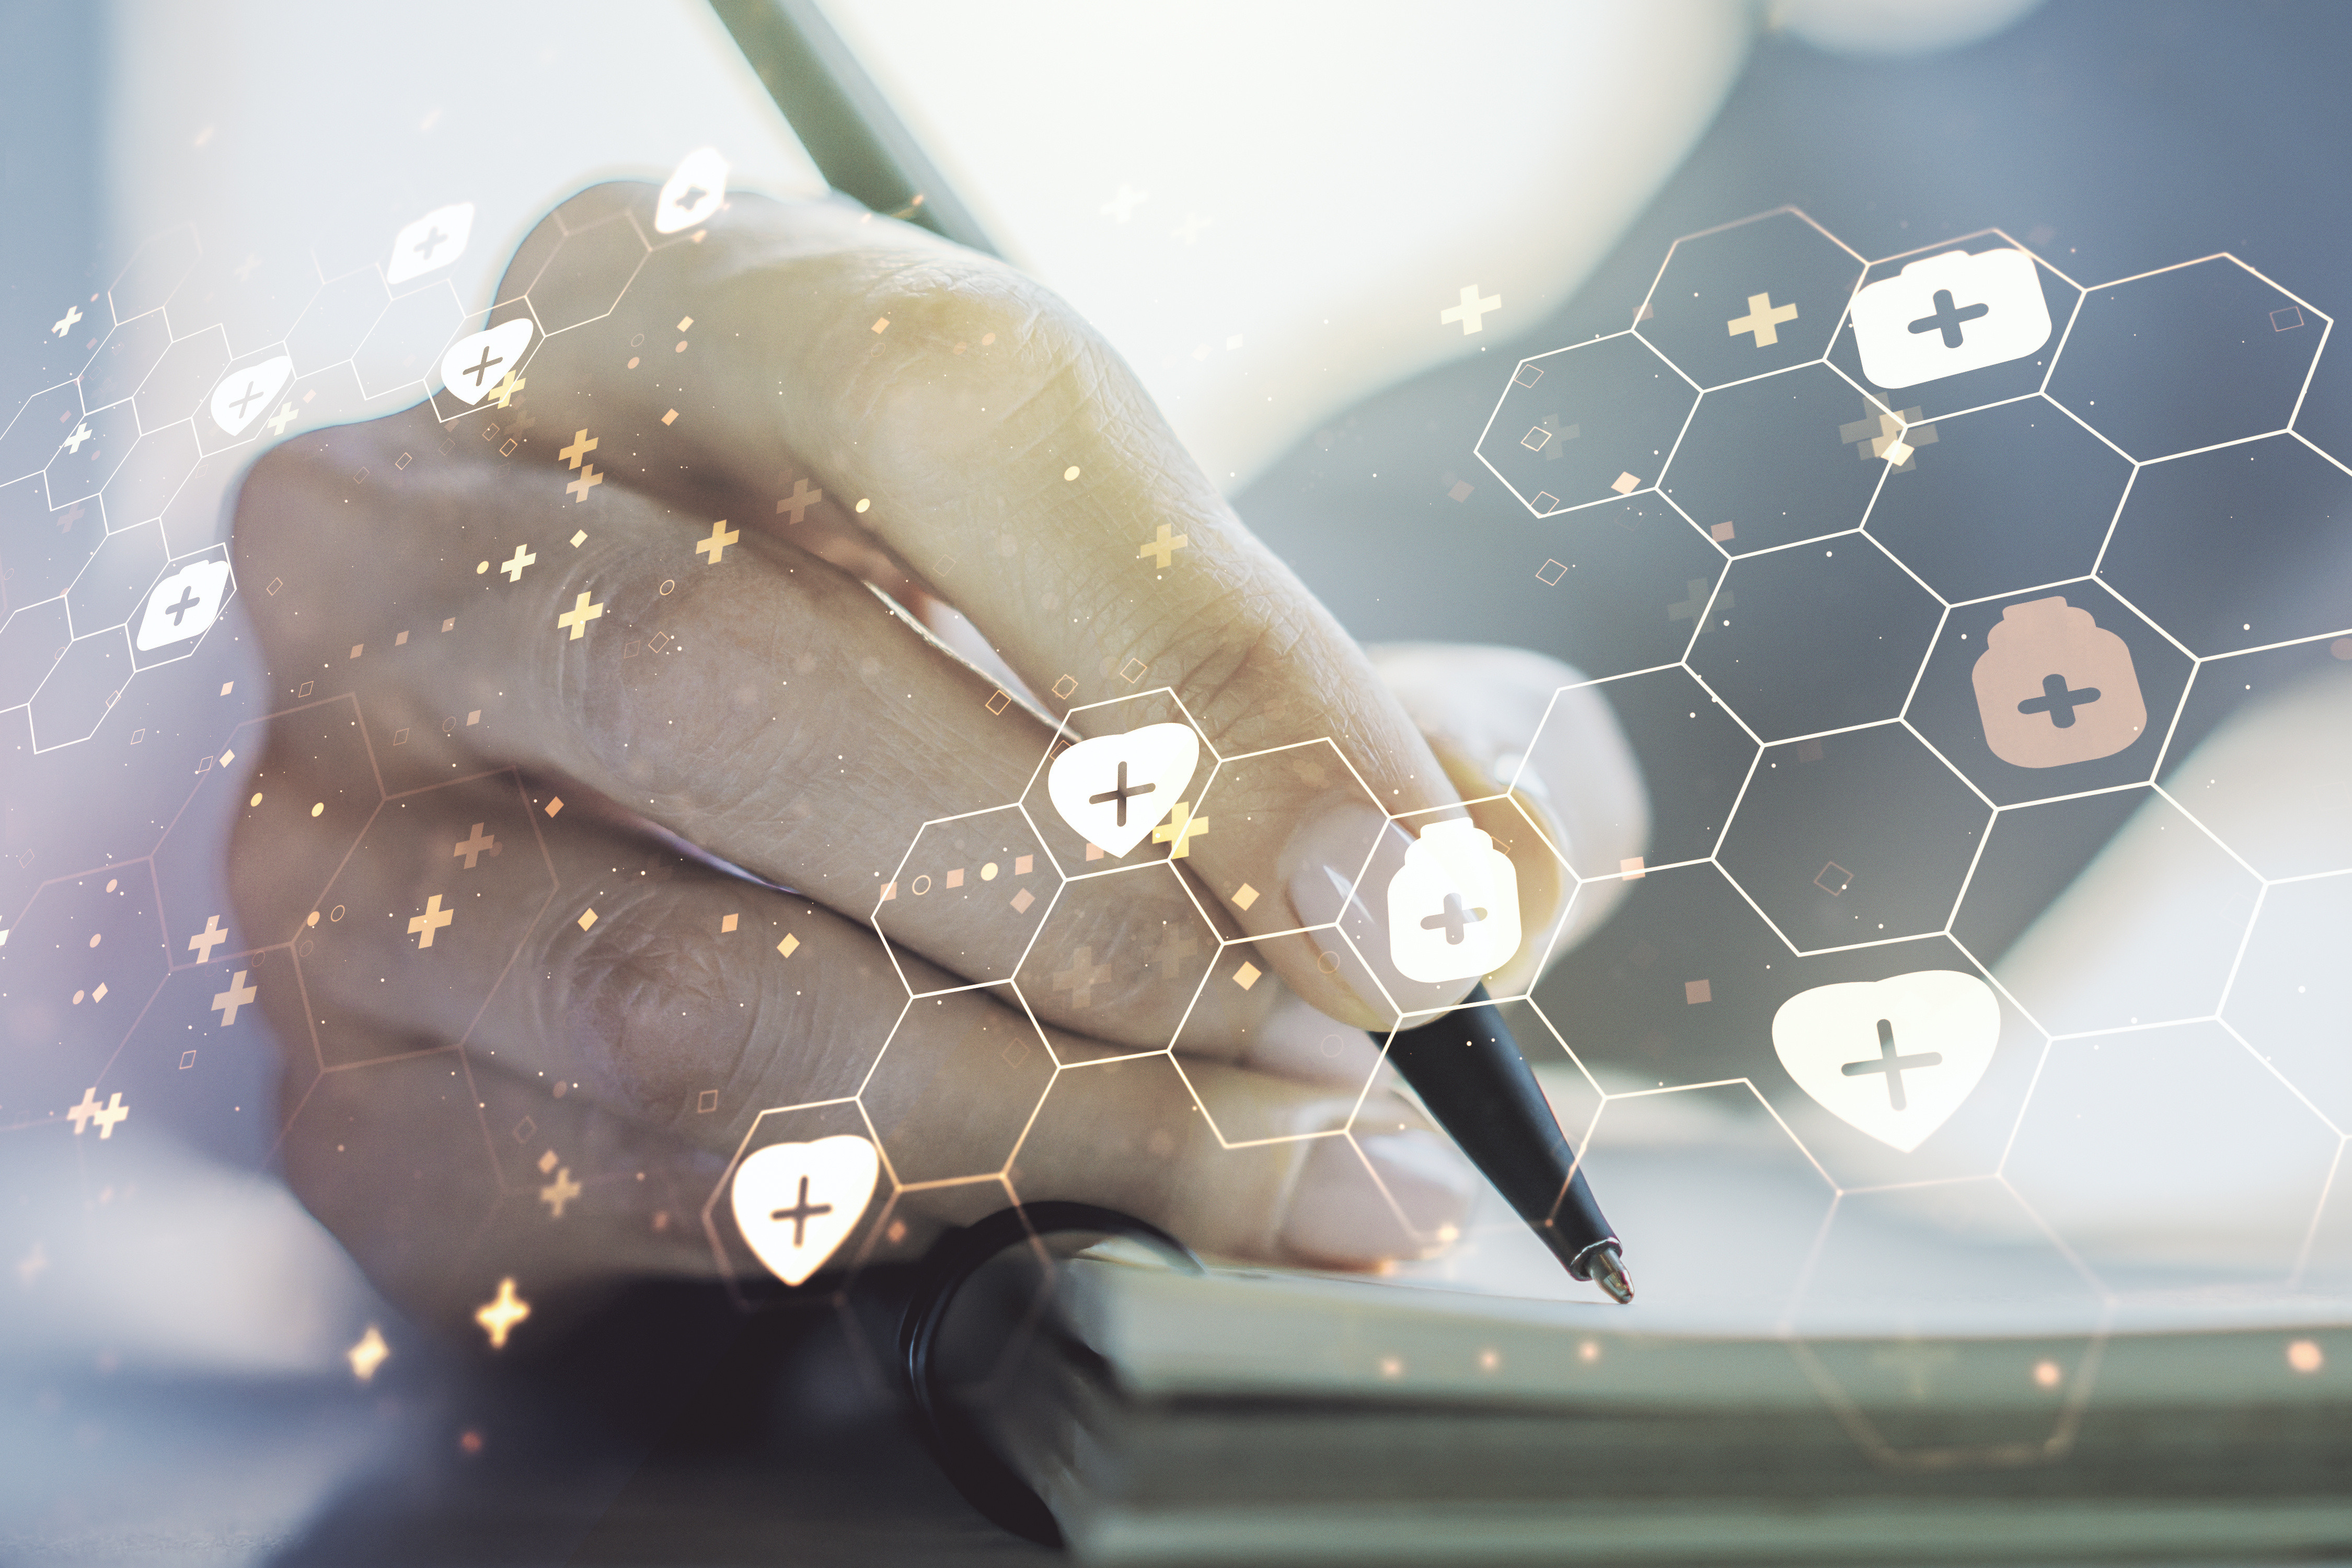 Connecting the Dots: How Medical Writers Interpret, Analyze, and Apply Key Lessons From the Latest FDA Guidances to Clinical Studies